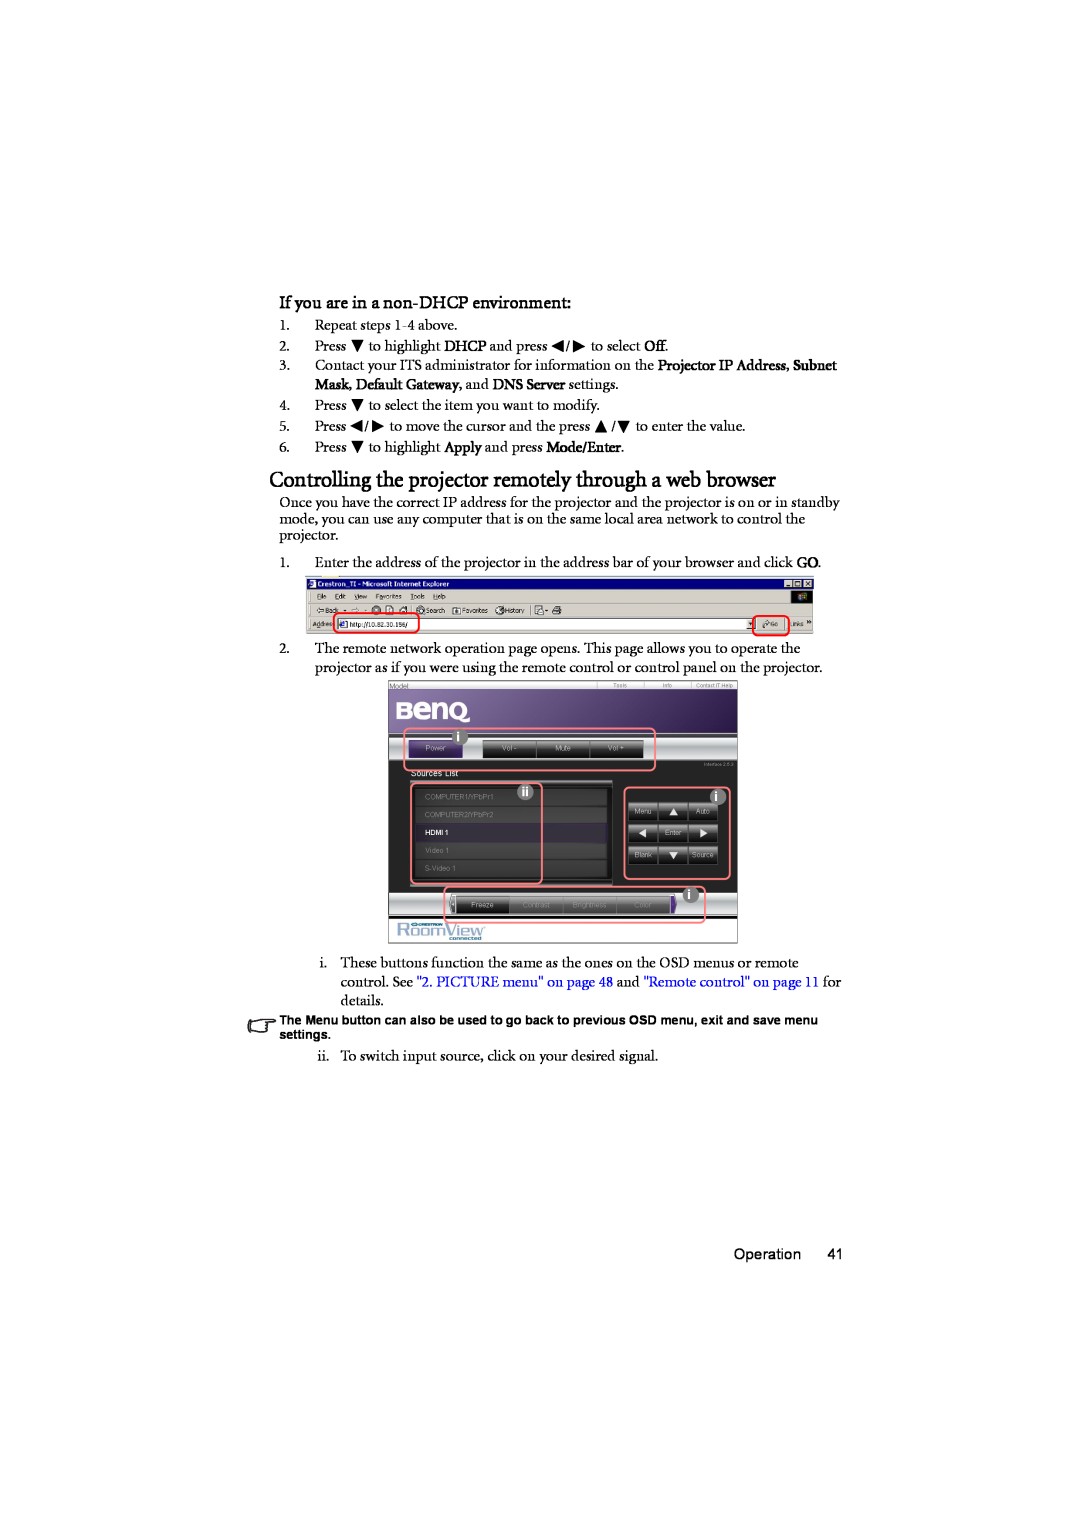 BenQ MP776 ST user manual Controlling the projector remotely through a web browser, If you are in a non-DHCP environment 